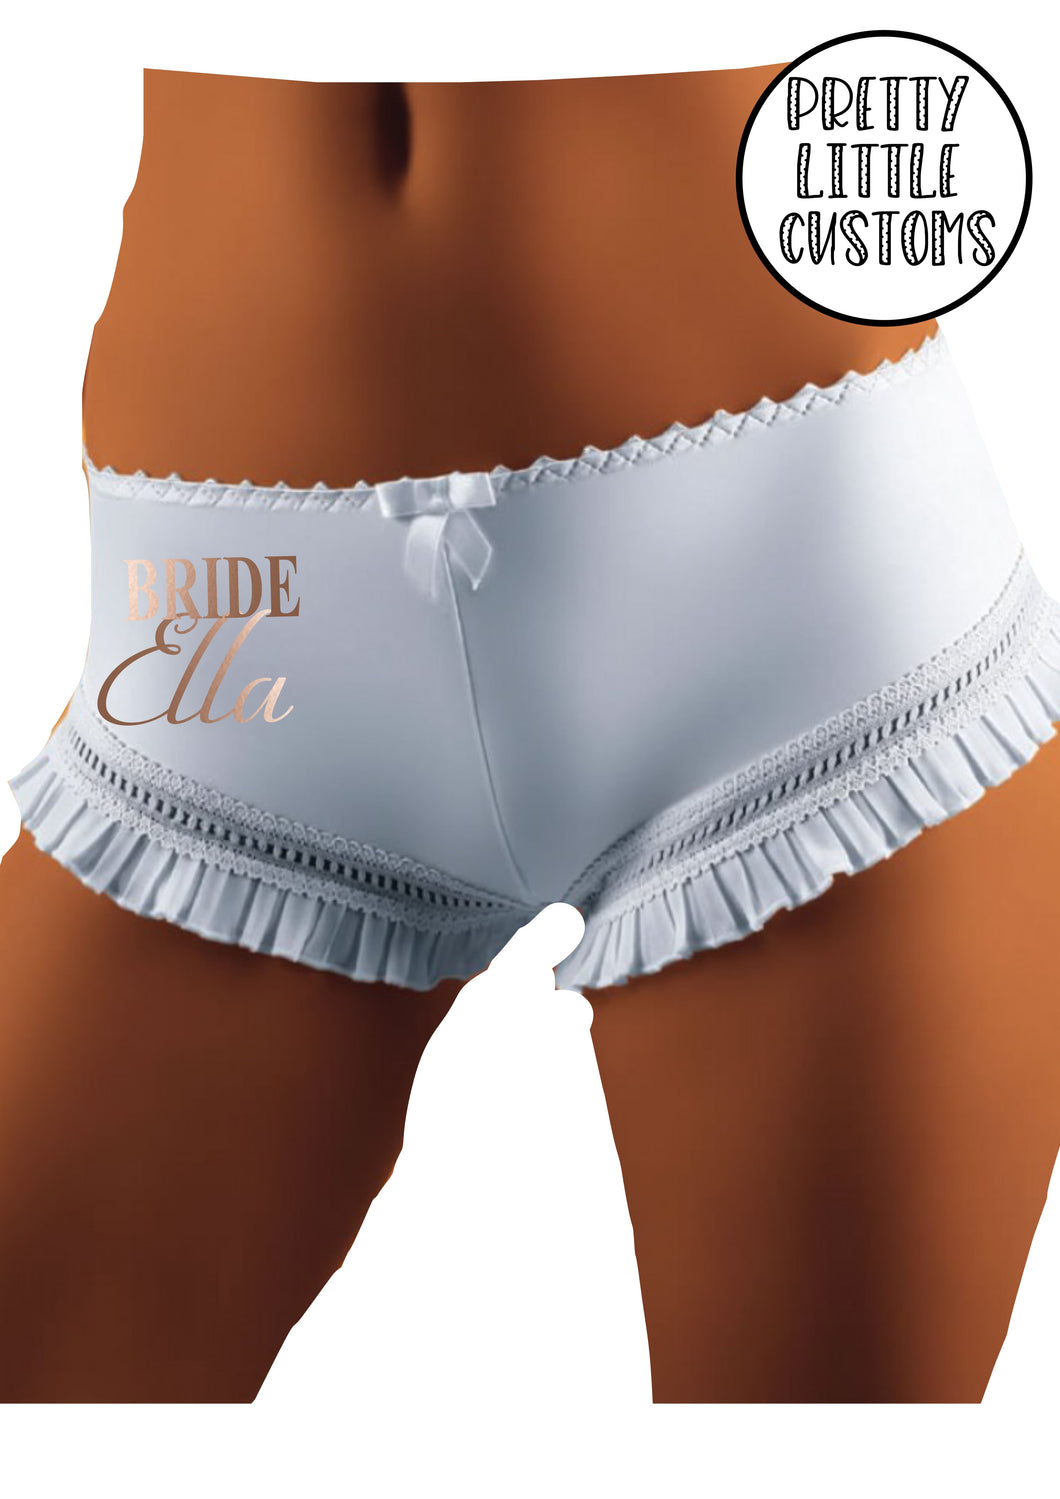 Personalised Bride (your name) bridal underwear - frill shorts -white/ –  Pretty Little Customs